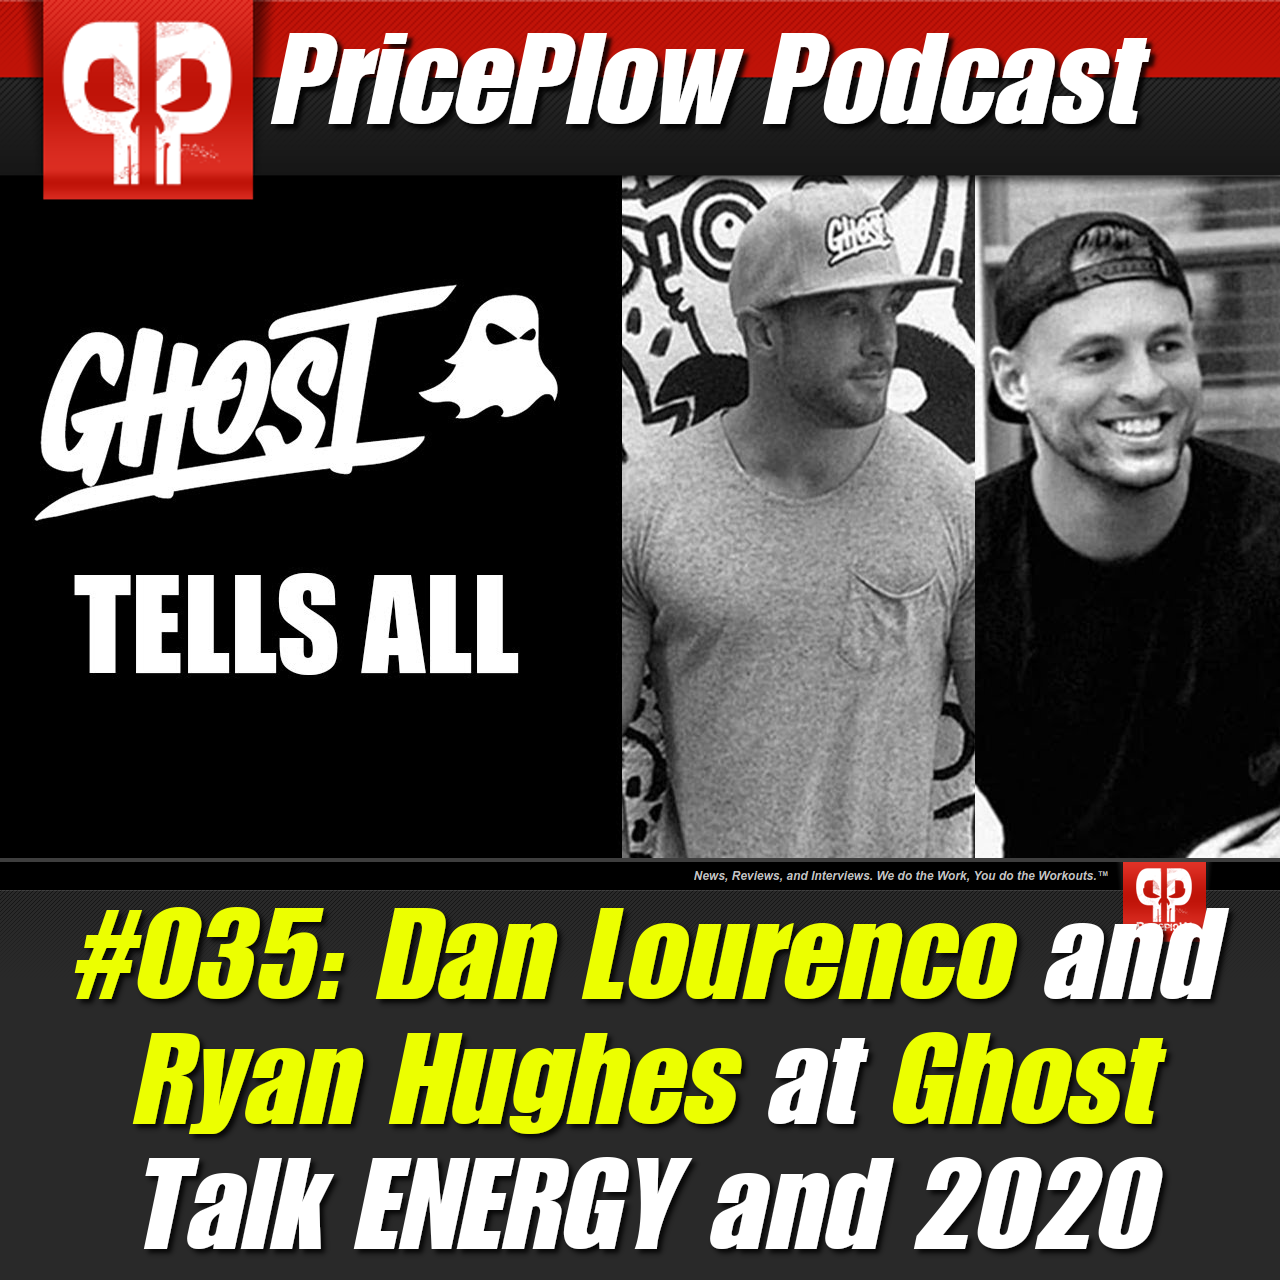 PricePlow Podcast #035: Dan Lourenco and Ryan Hughes at Ghost Tell All